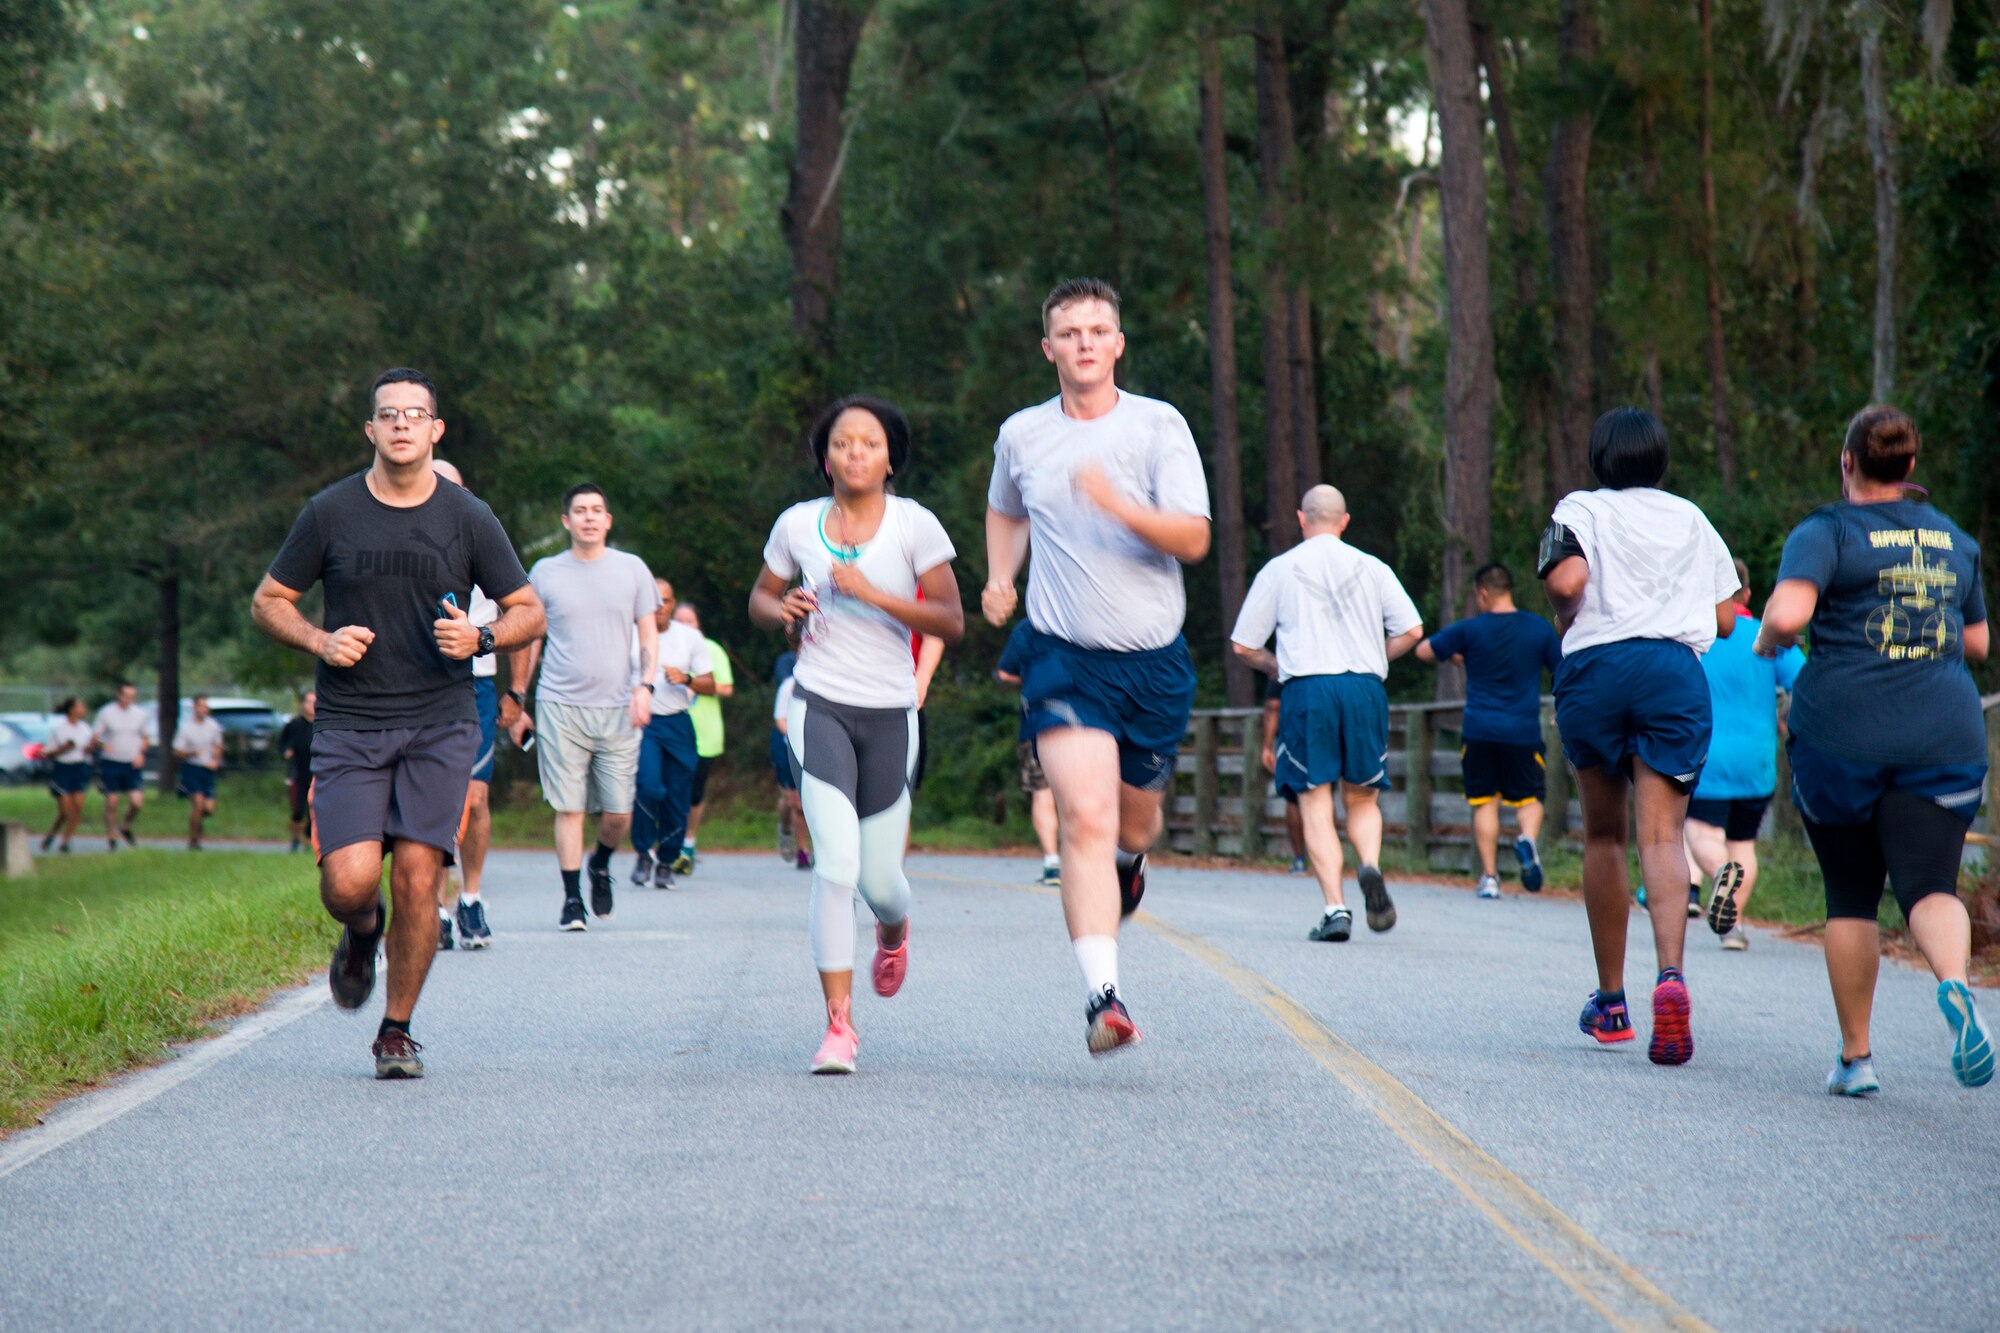 Airmen run during a Violence Prevention Awareness 5K, Oct. 4, 2017, at Moody Air Force Base, Ga. Moody leadership proclaimed October as Violence Prevention Awareness Month in order to recognize and educate Airmen and families about suicide prevention, drug abuse, stalking awareness and domestic violence prevention. (U.S. Air Force photo by Airman 1st Class Erick Requadt)